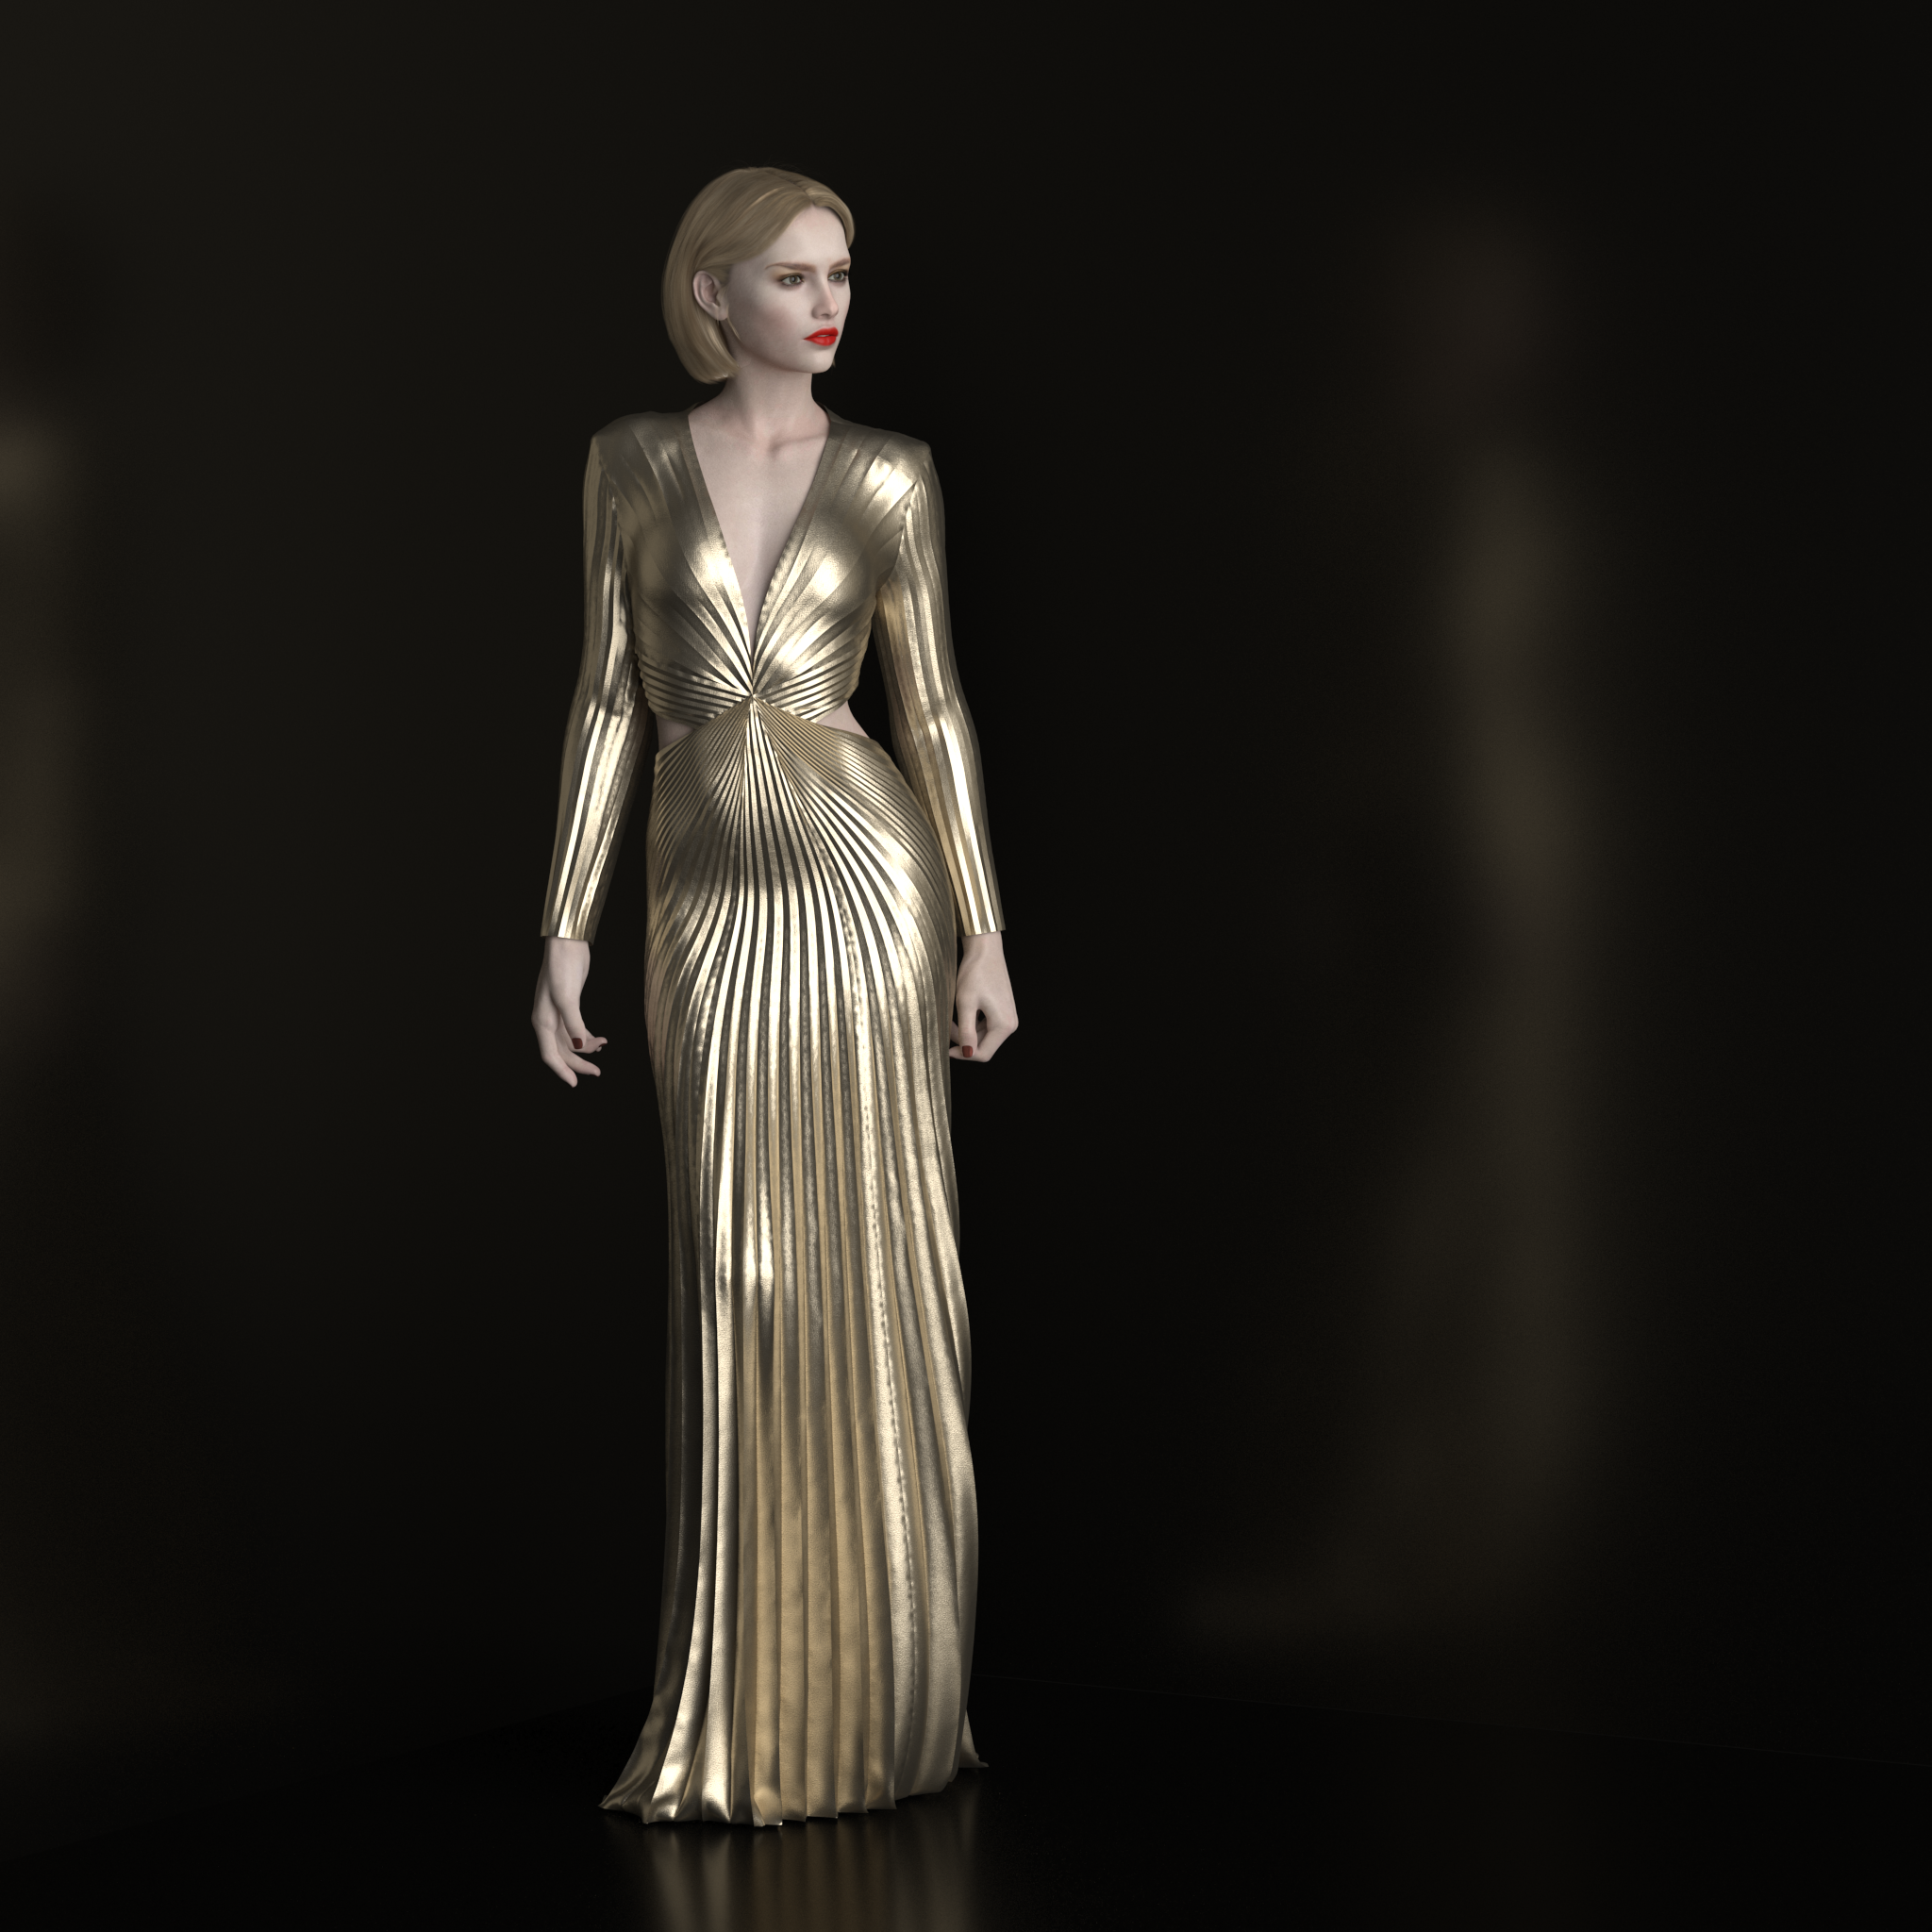 3D avatar and gown